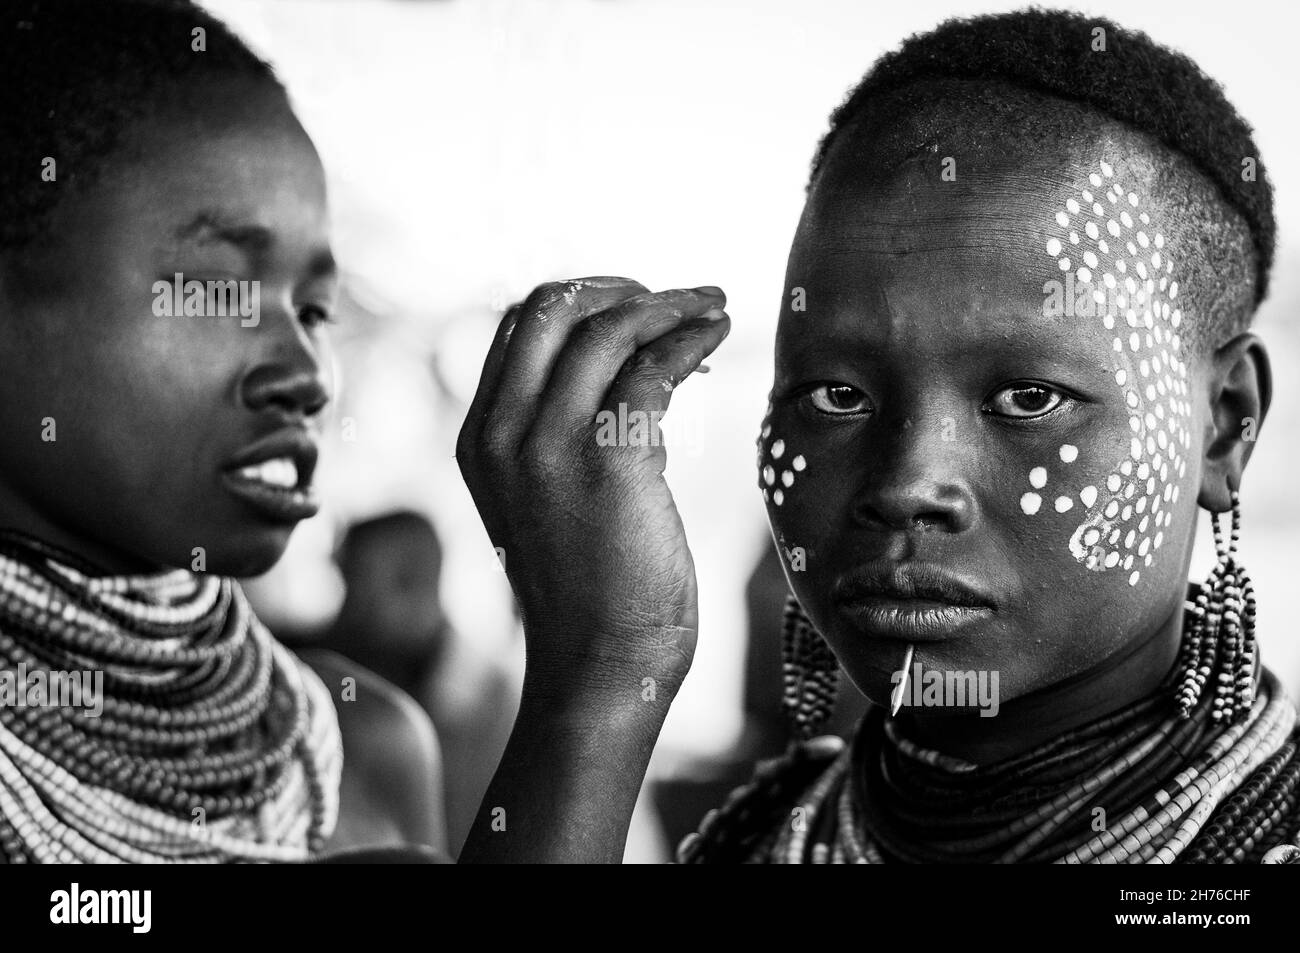 Karo woman painting white dots on another woman's face for decoration Stock Photo